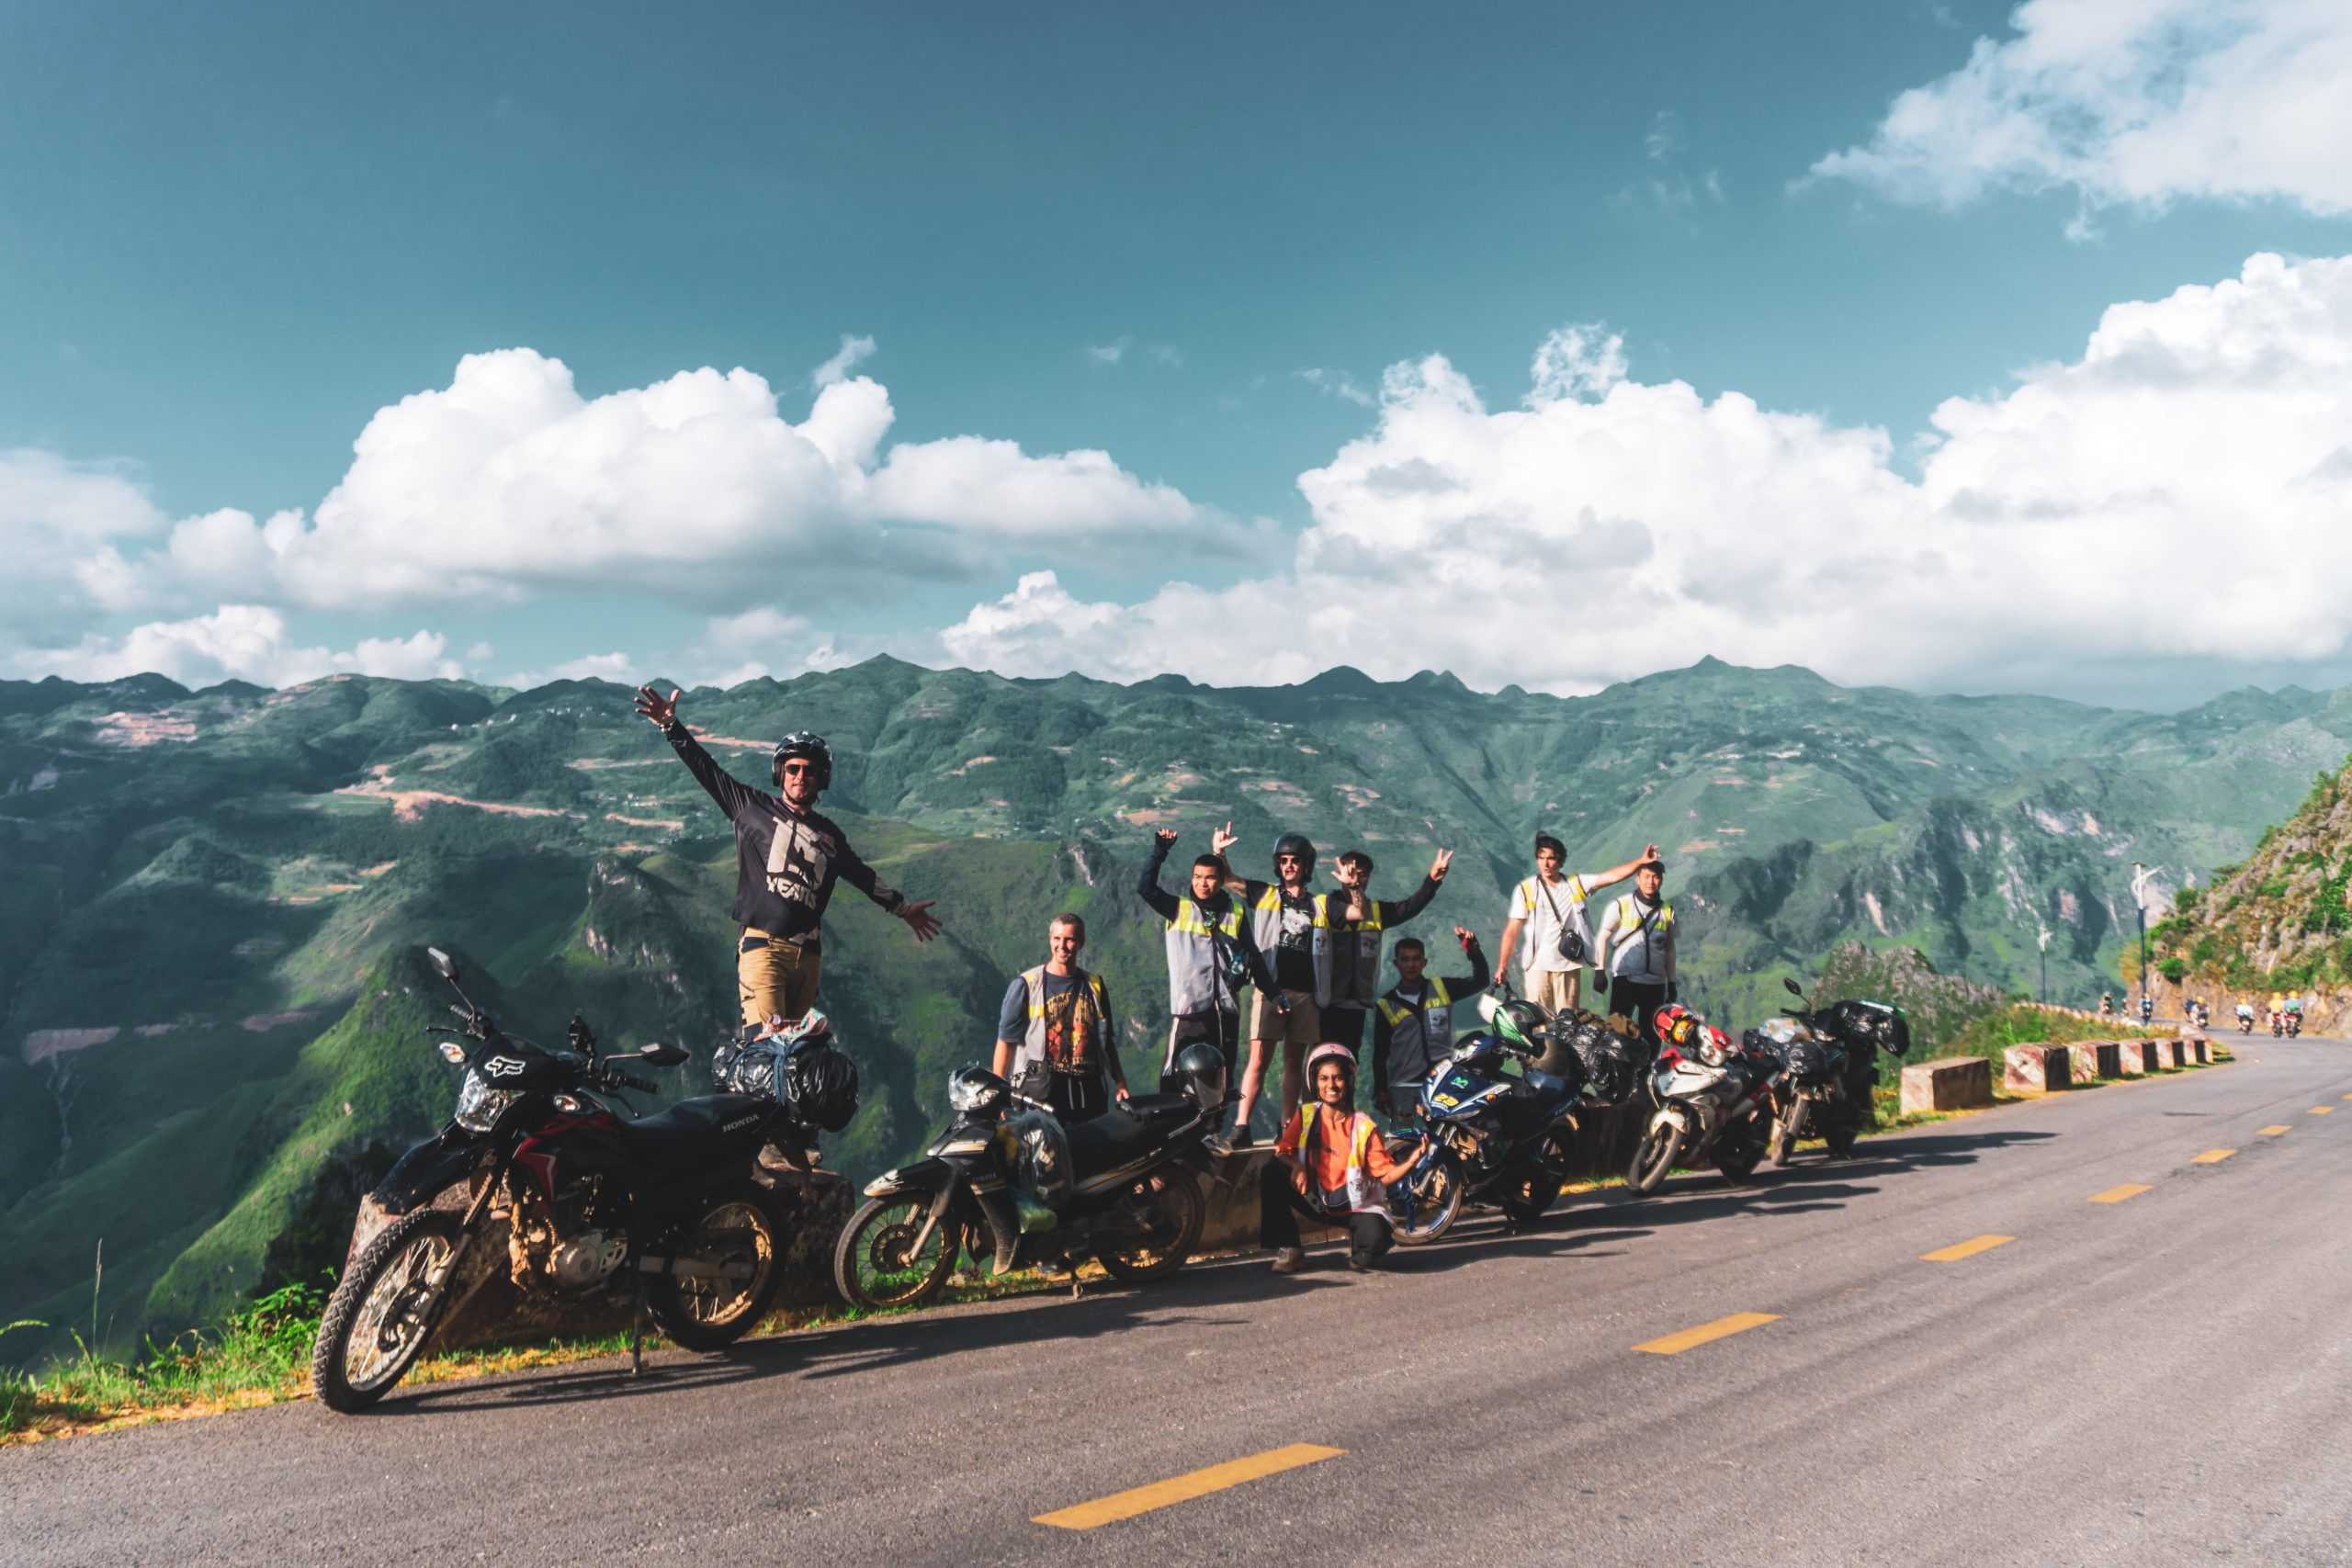 Join us for the REAL Ha Giang Loop Tour!